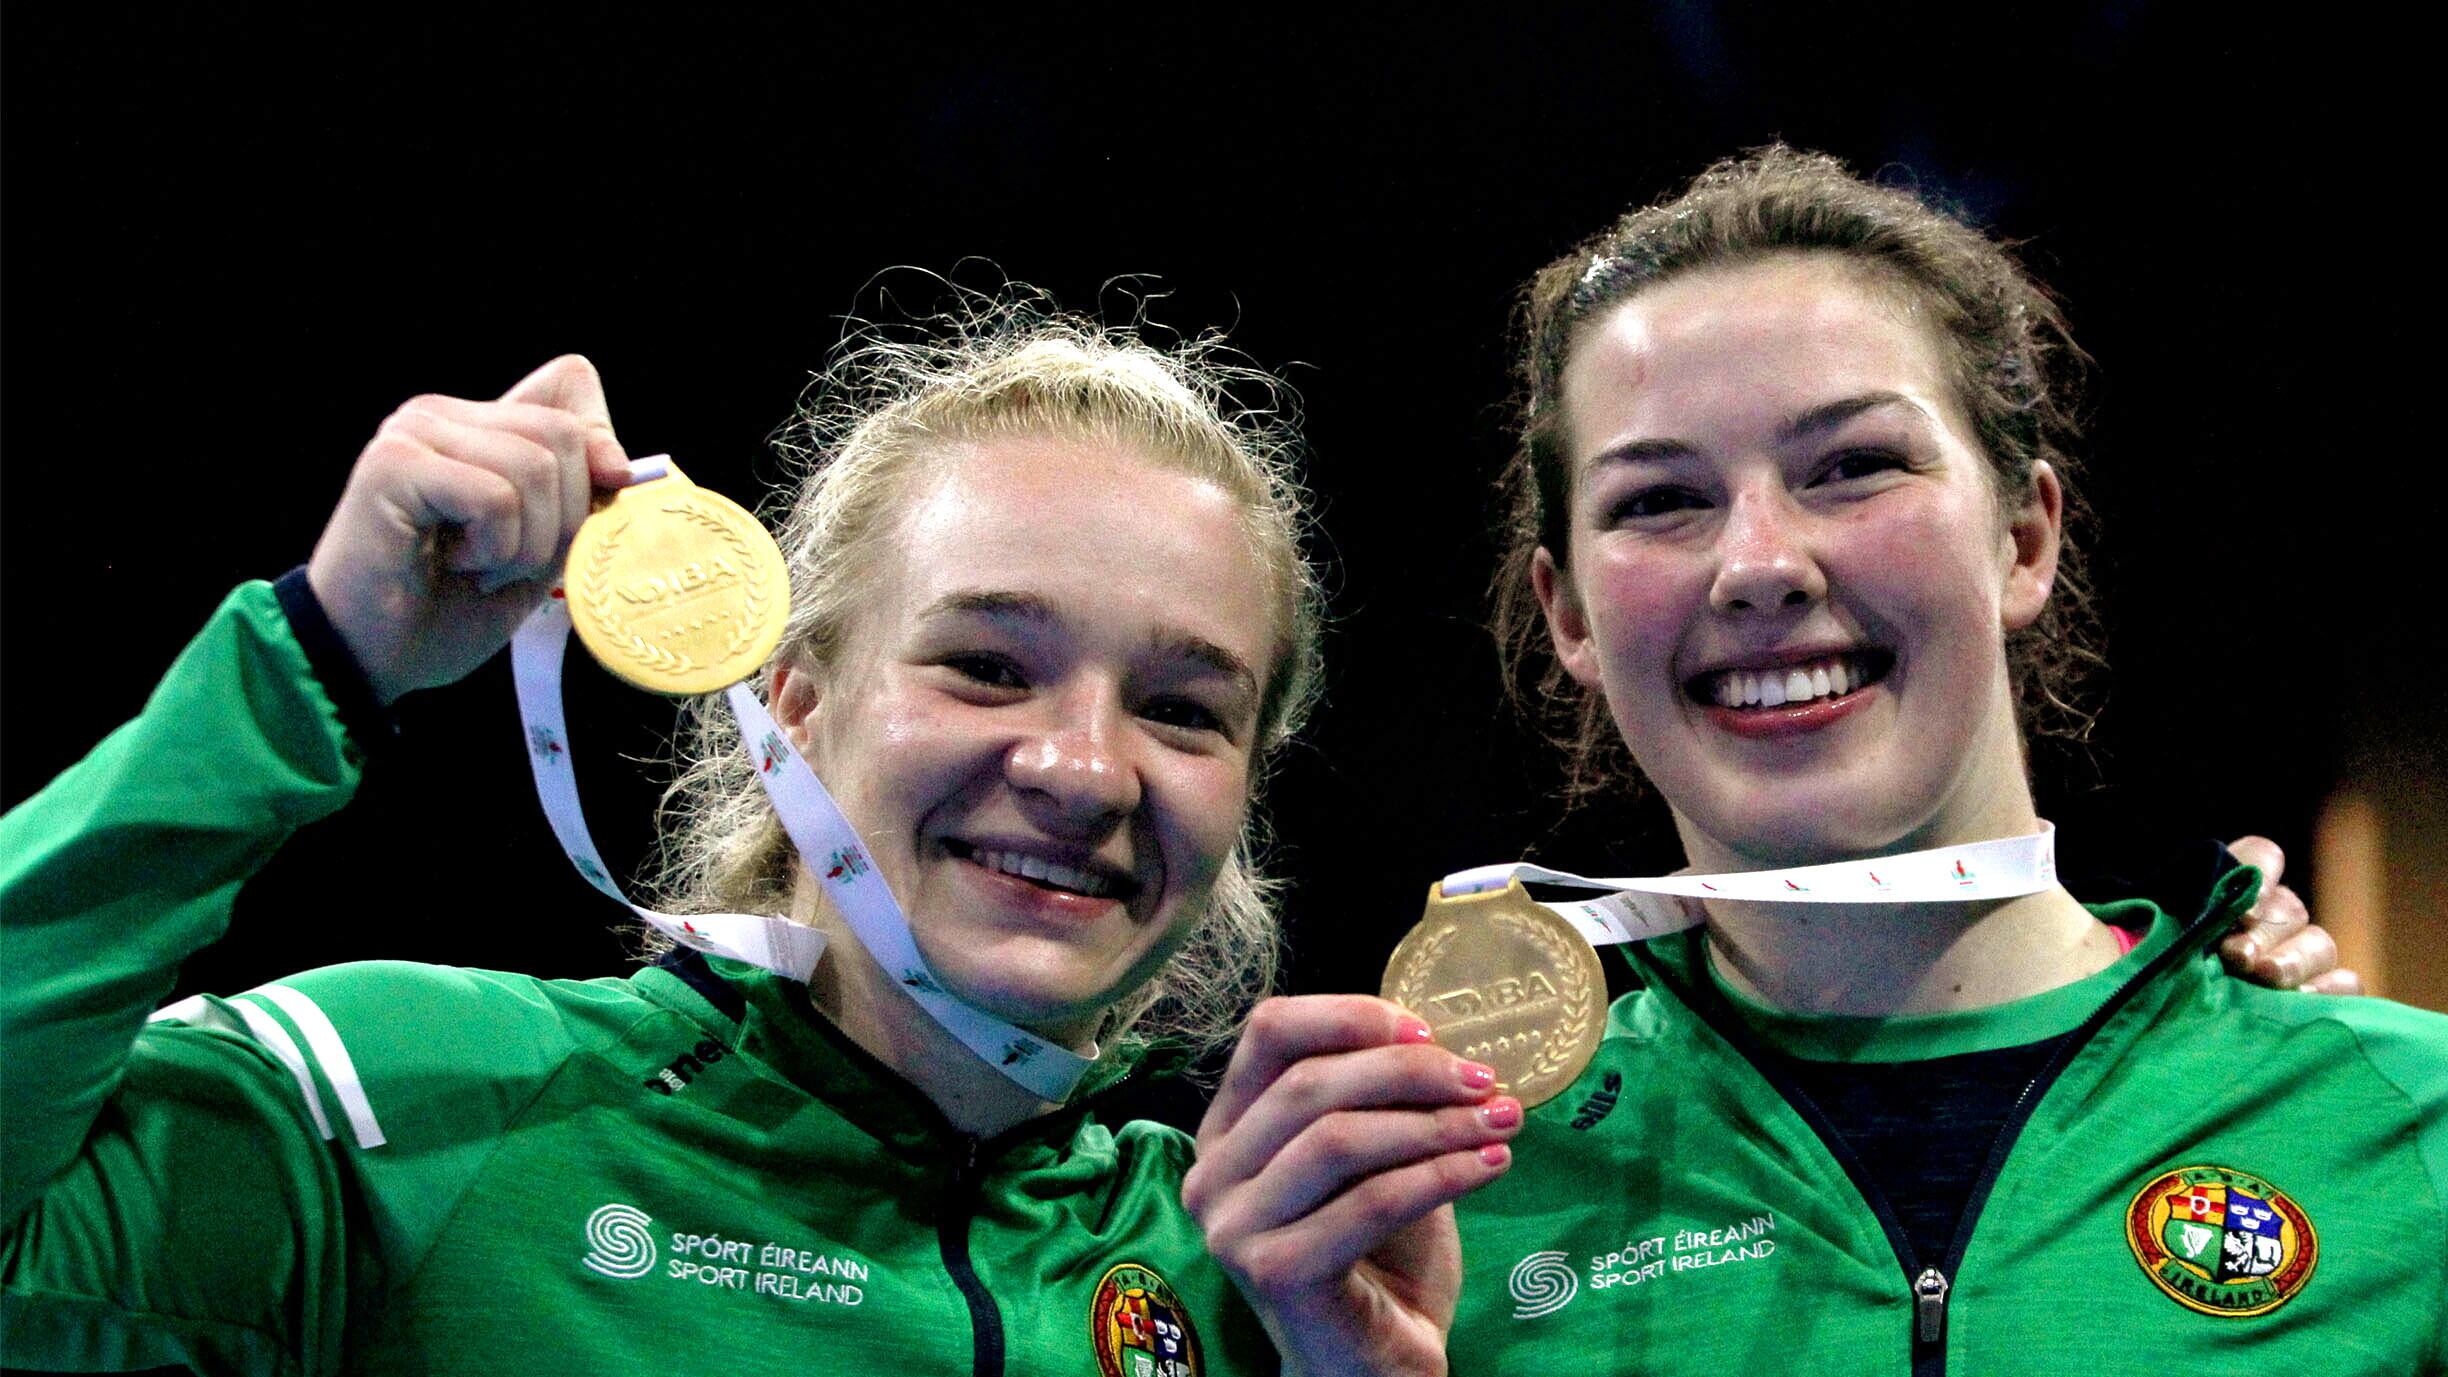 Amy Broadhurst and Lisa O'Rourke won gold medals at last year's World Elite Championships, as well as picking up significant prize-money at the IBE competition. Pictured by Sportsfile